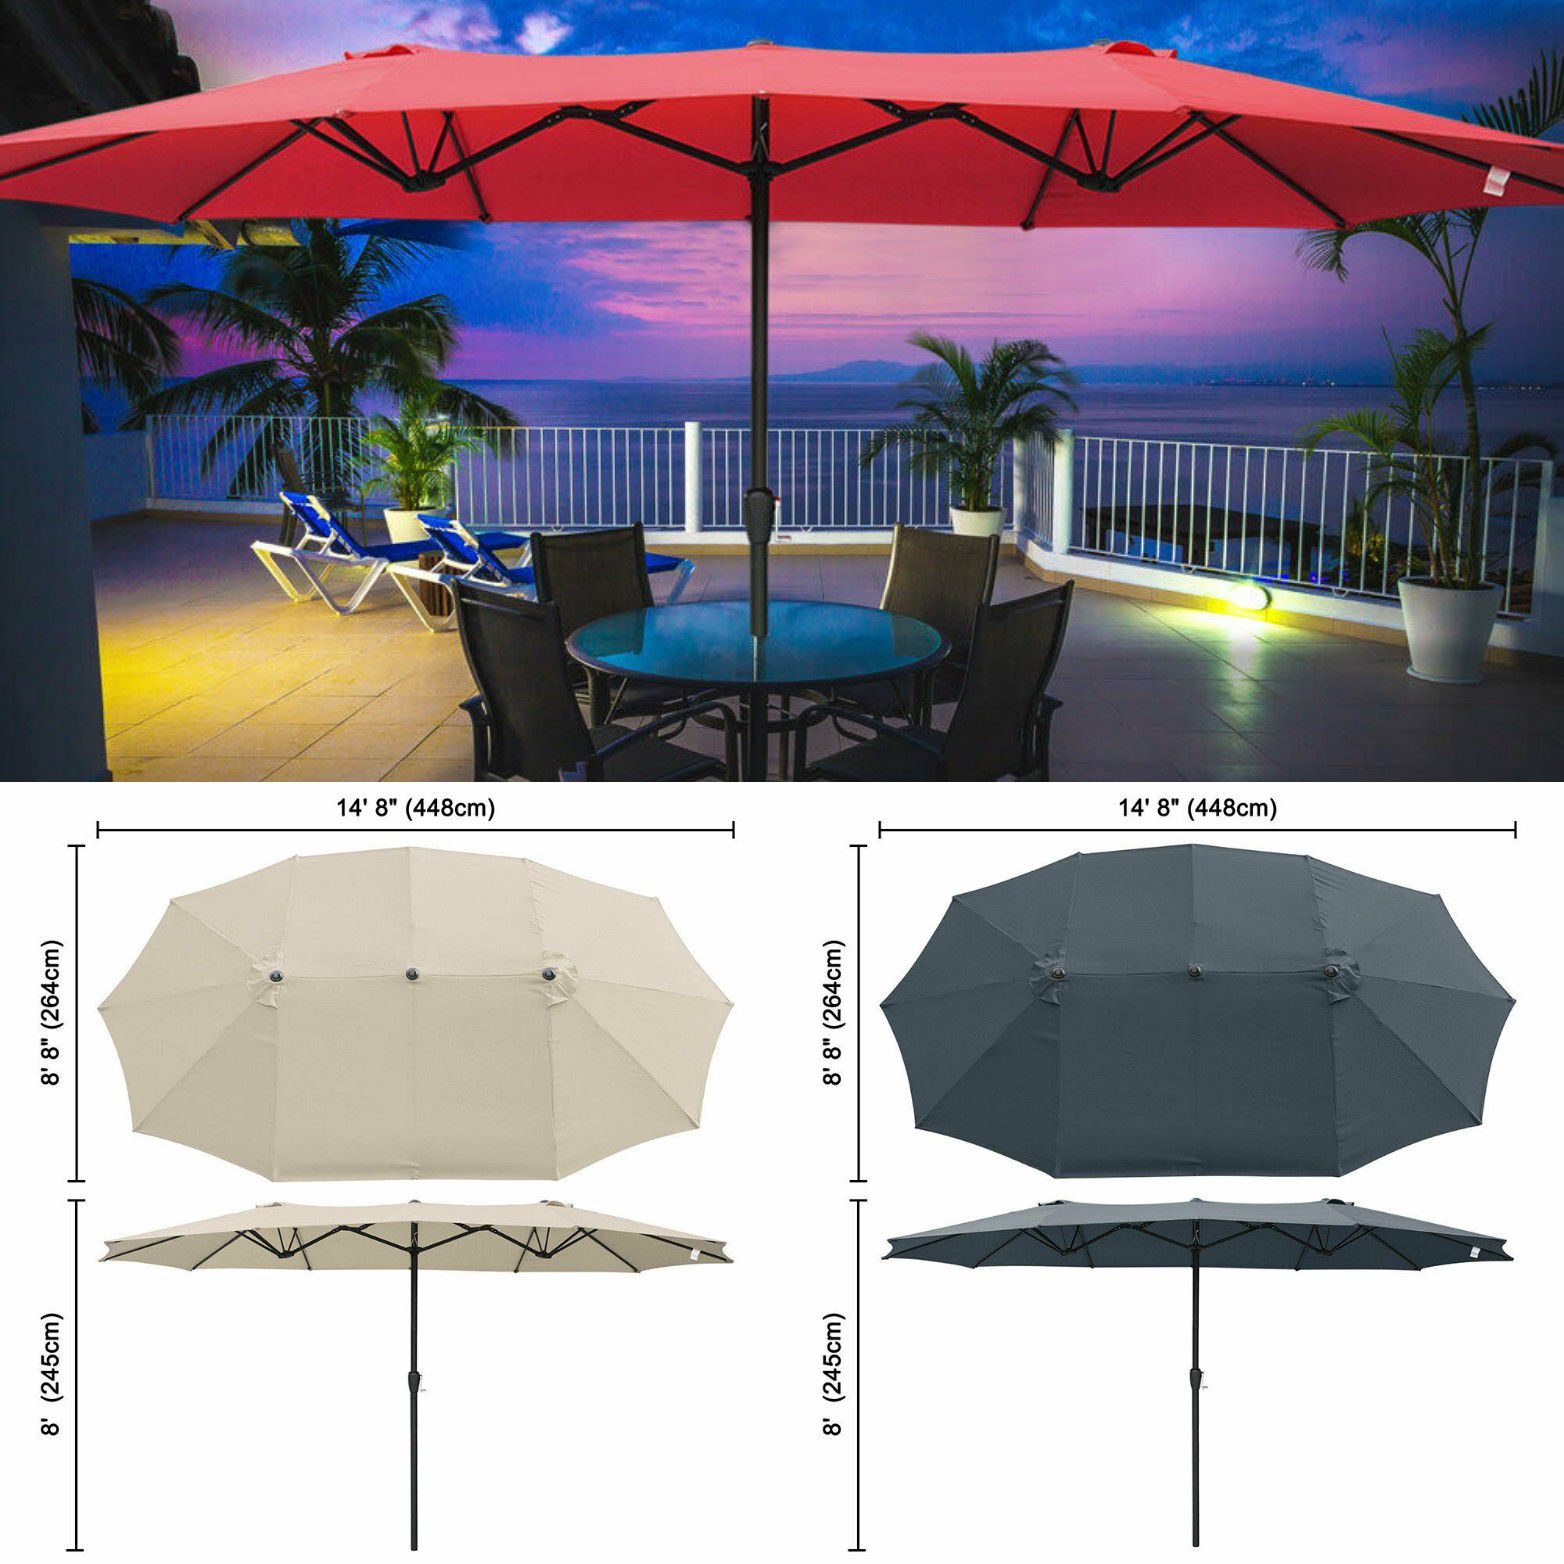 Outdoor 15x9 ft Patio Oval Patio Garden Lawn Umbrella with Wind Vent. Stand Sold Separately.